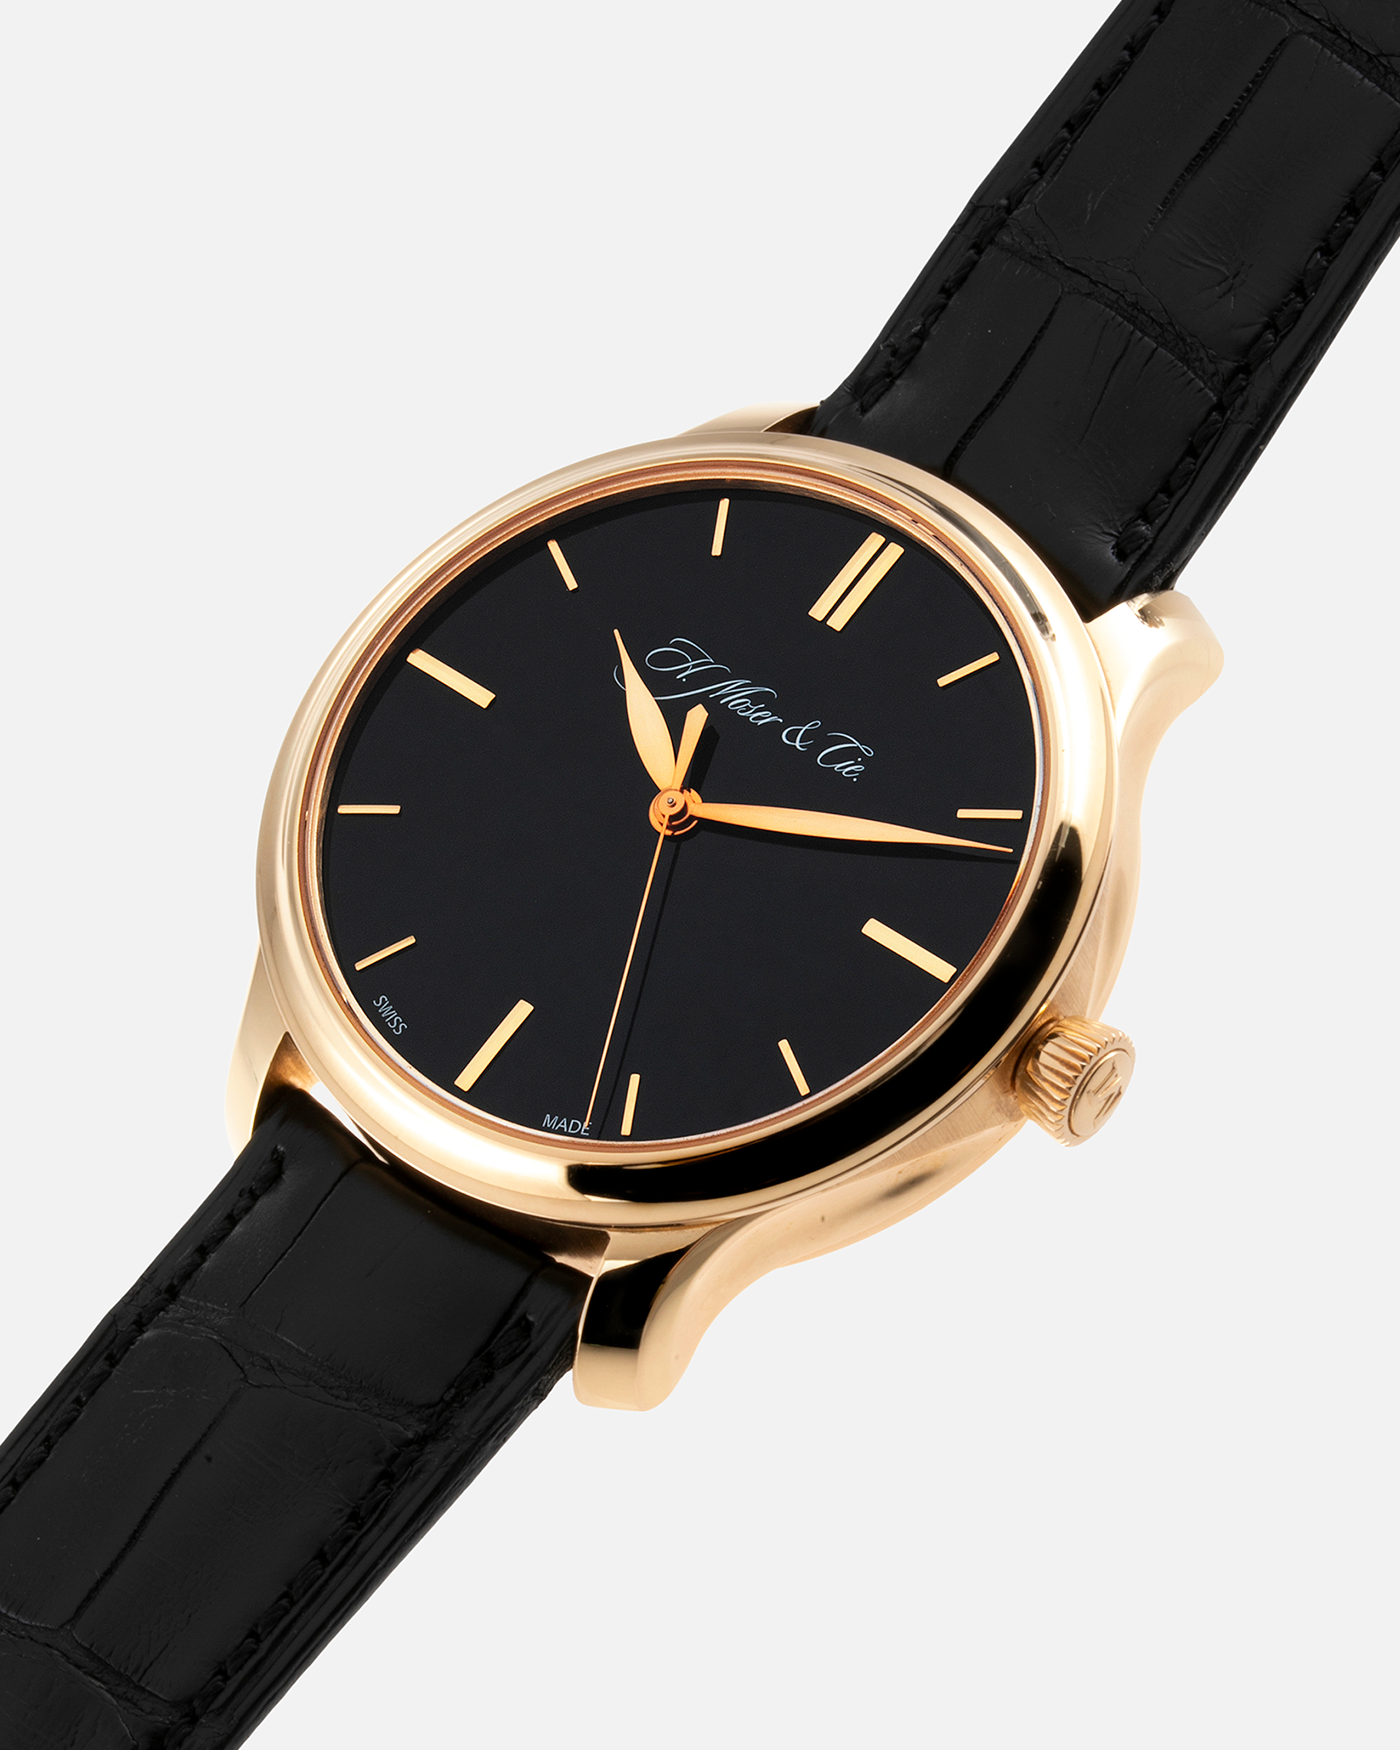 Brand: H. Moser & Cie Year: 2010's Model: Endeavour Monard Central Seconds Reference Number: 343.505-017 Material: 18k Rose Gold Movement: Manually wound Caliber HMC 343.505 Case Diameter: 40.8mm Bracelet/Strap: H. Moser & Cie Black Alligator Leather Strap with matching 18-carat Rose Gold Signed Tang Buckle